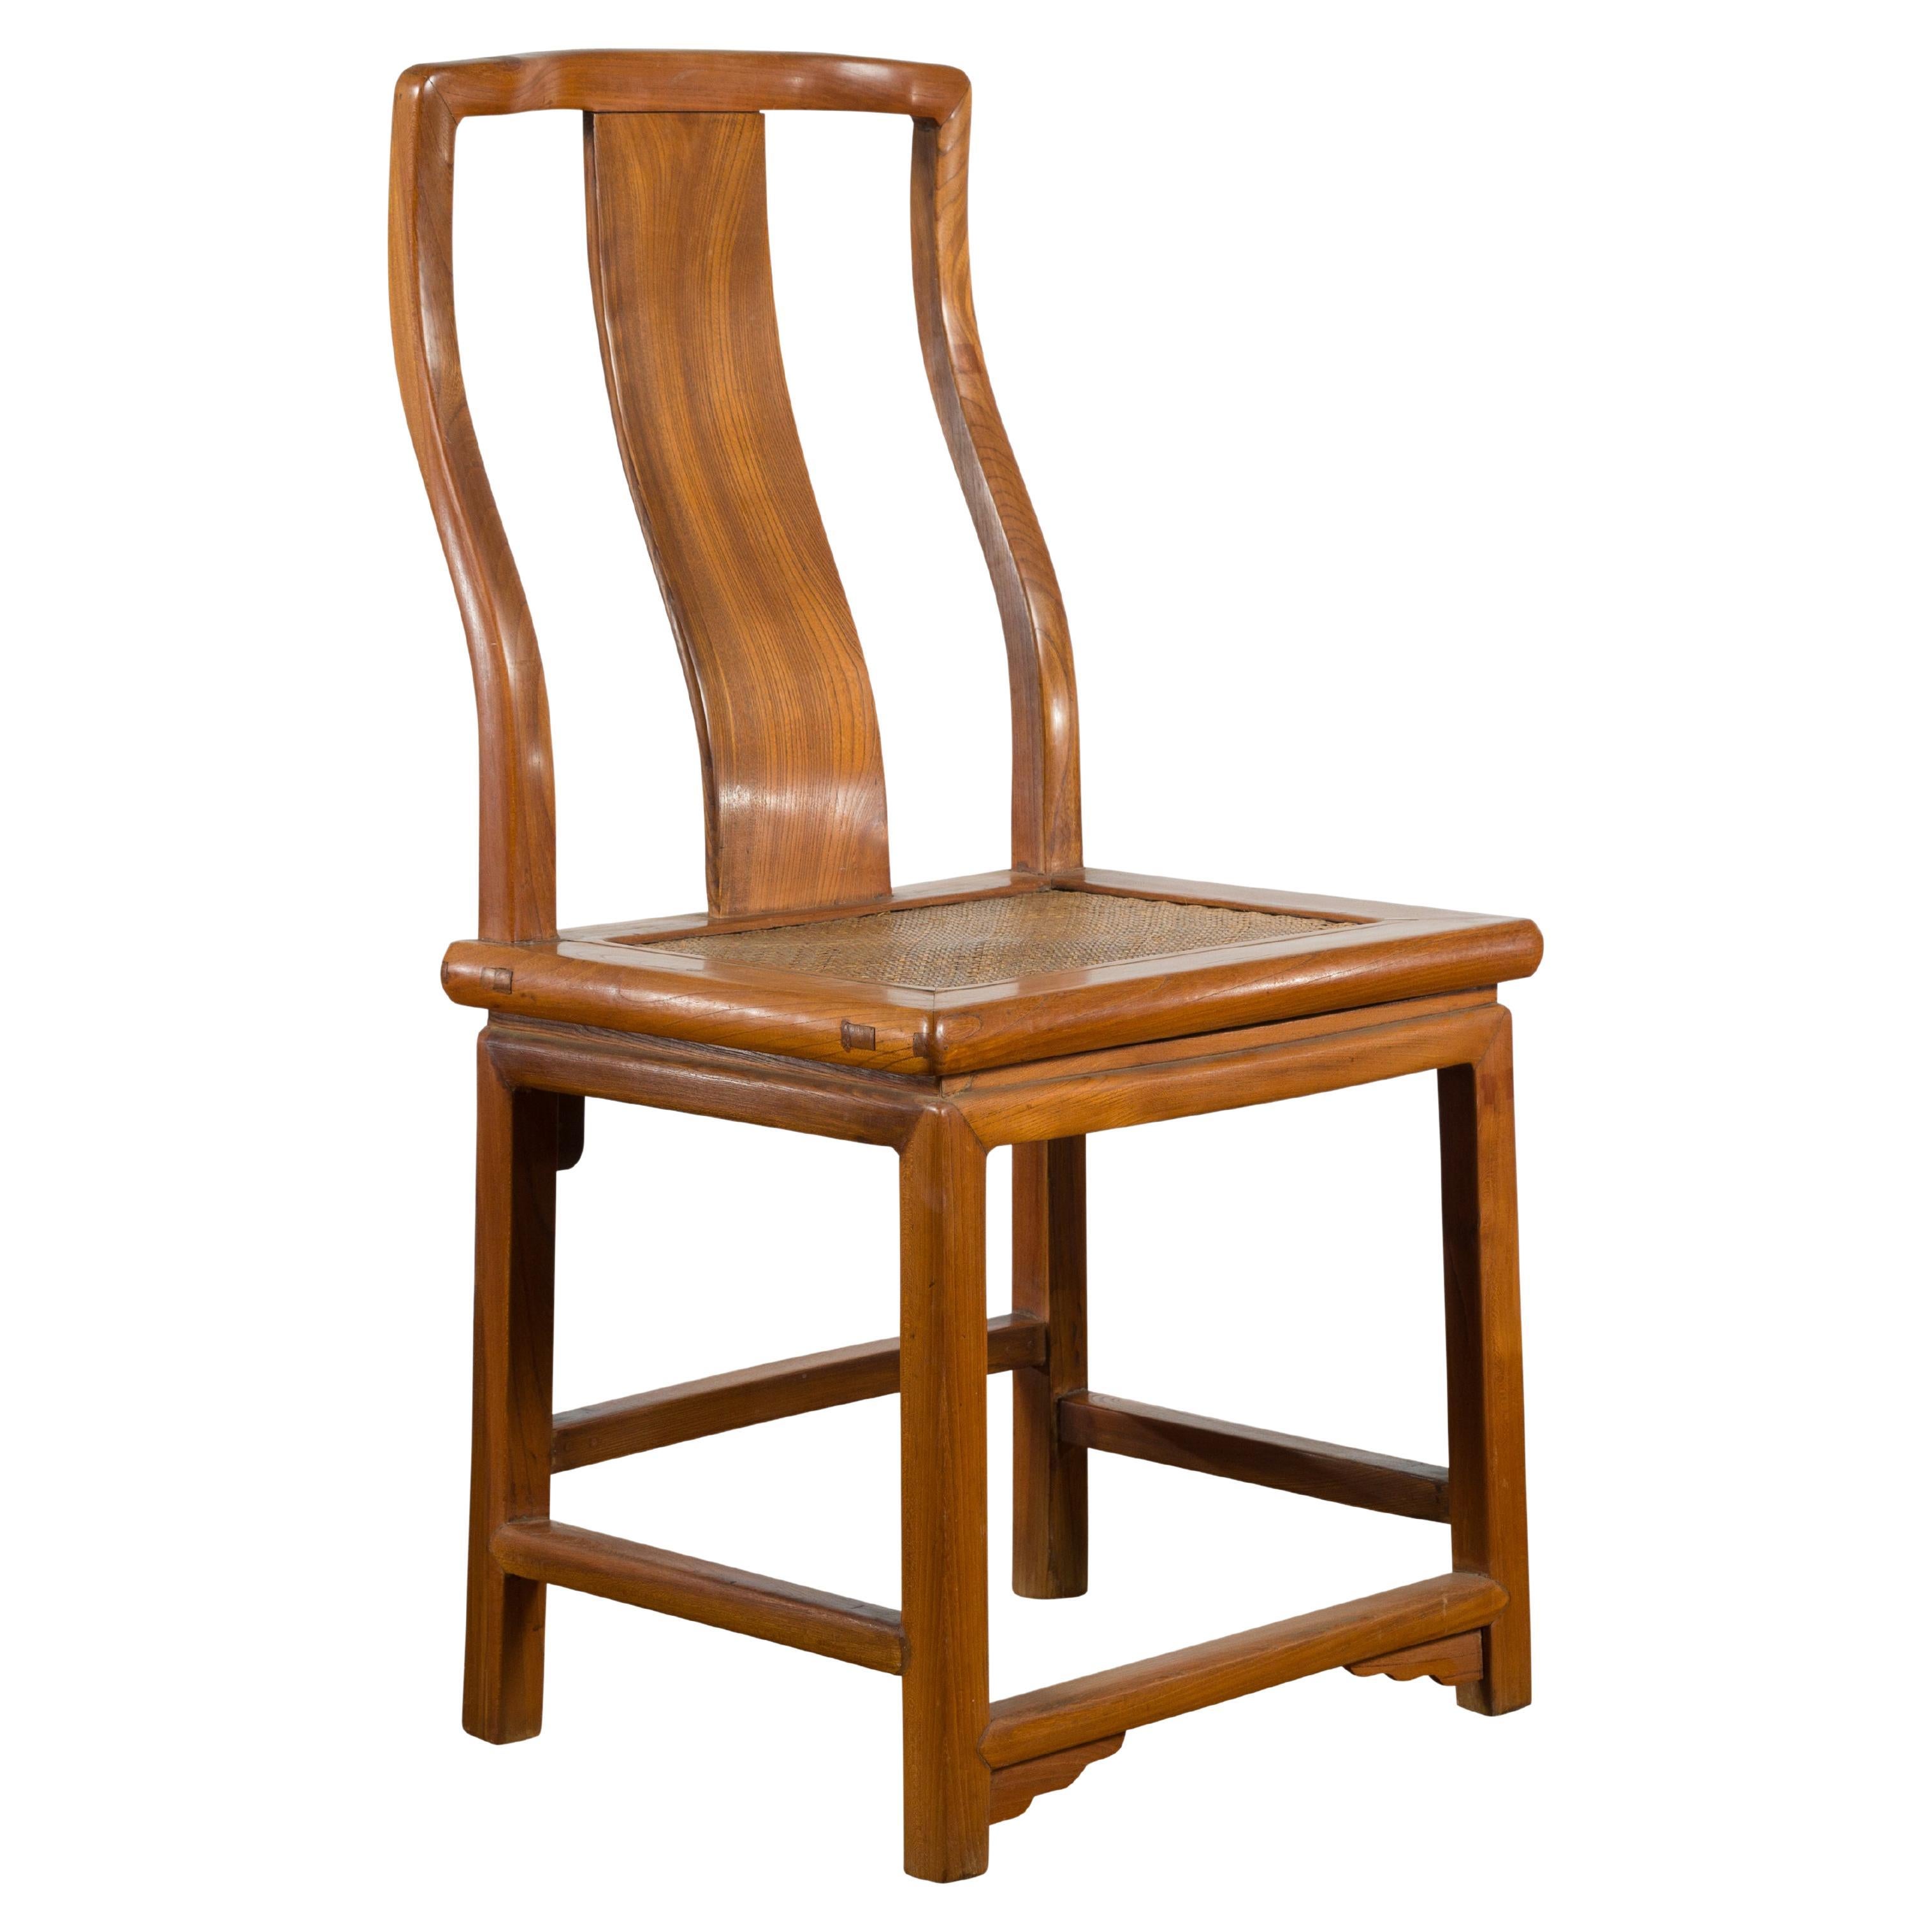 Chinese Early 20th Century Carved Elmwood Side Chair with Rattan Seat